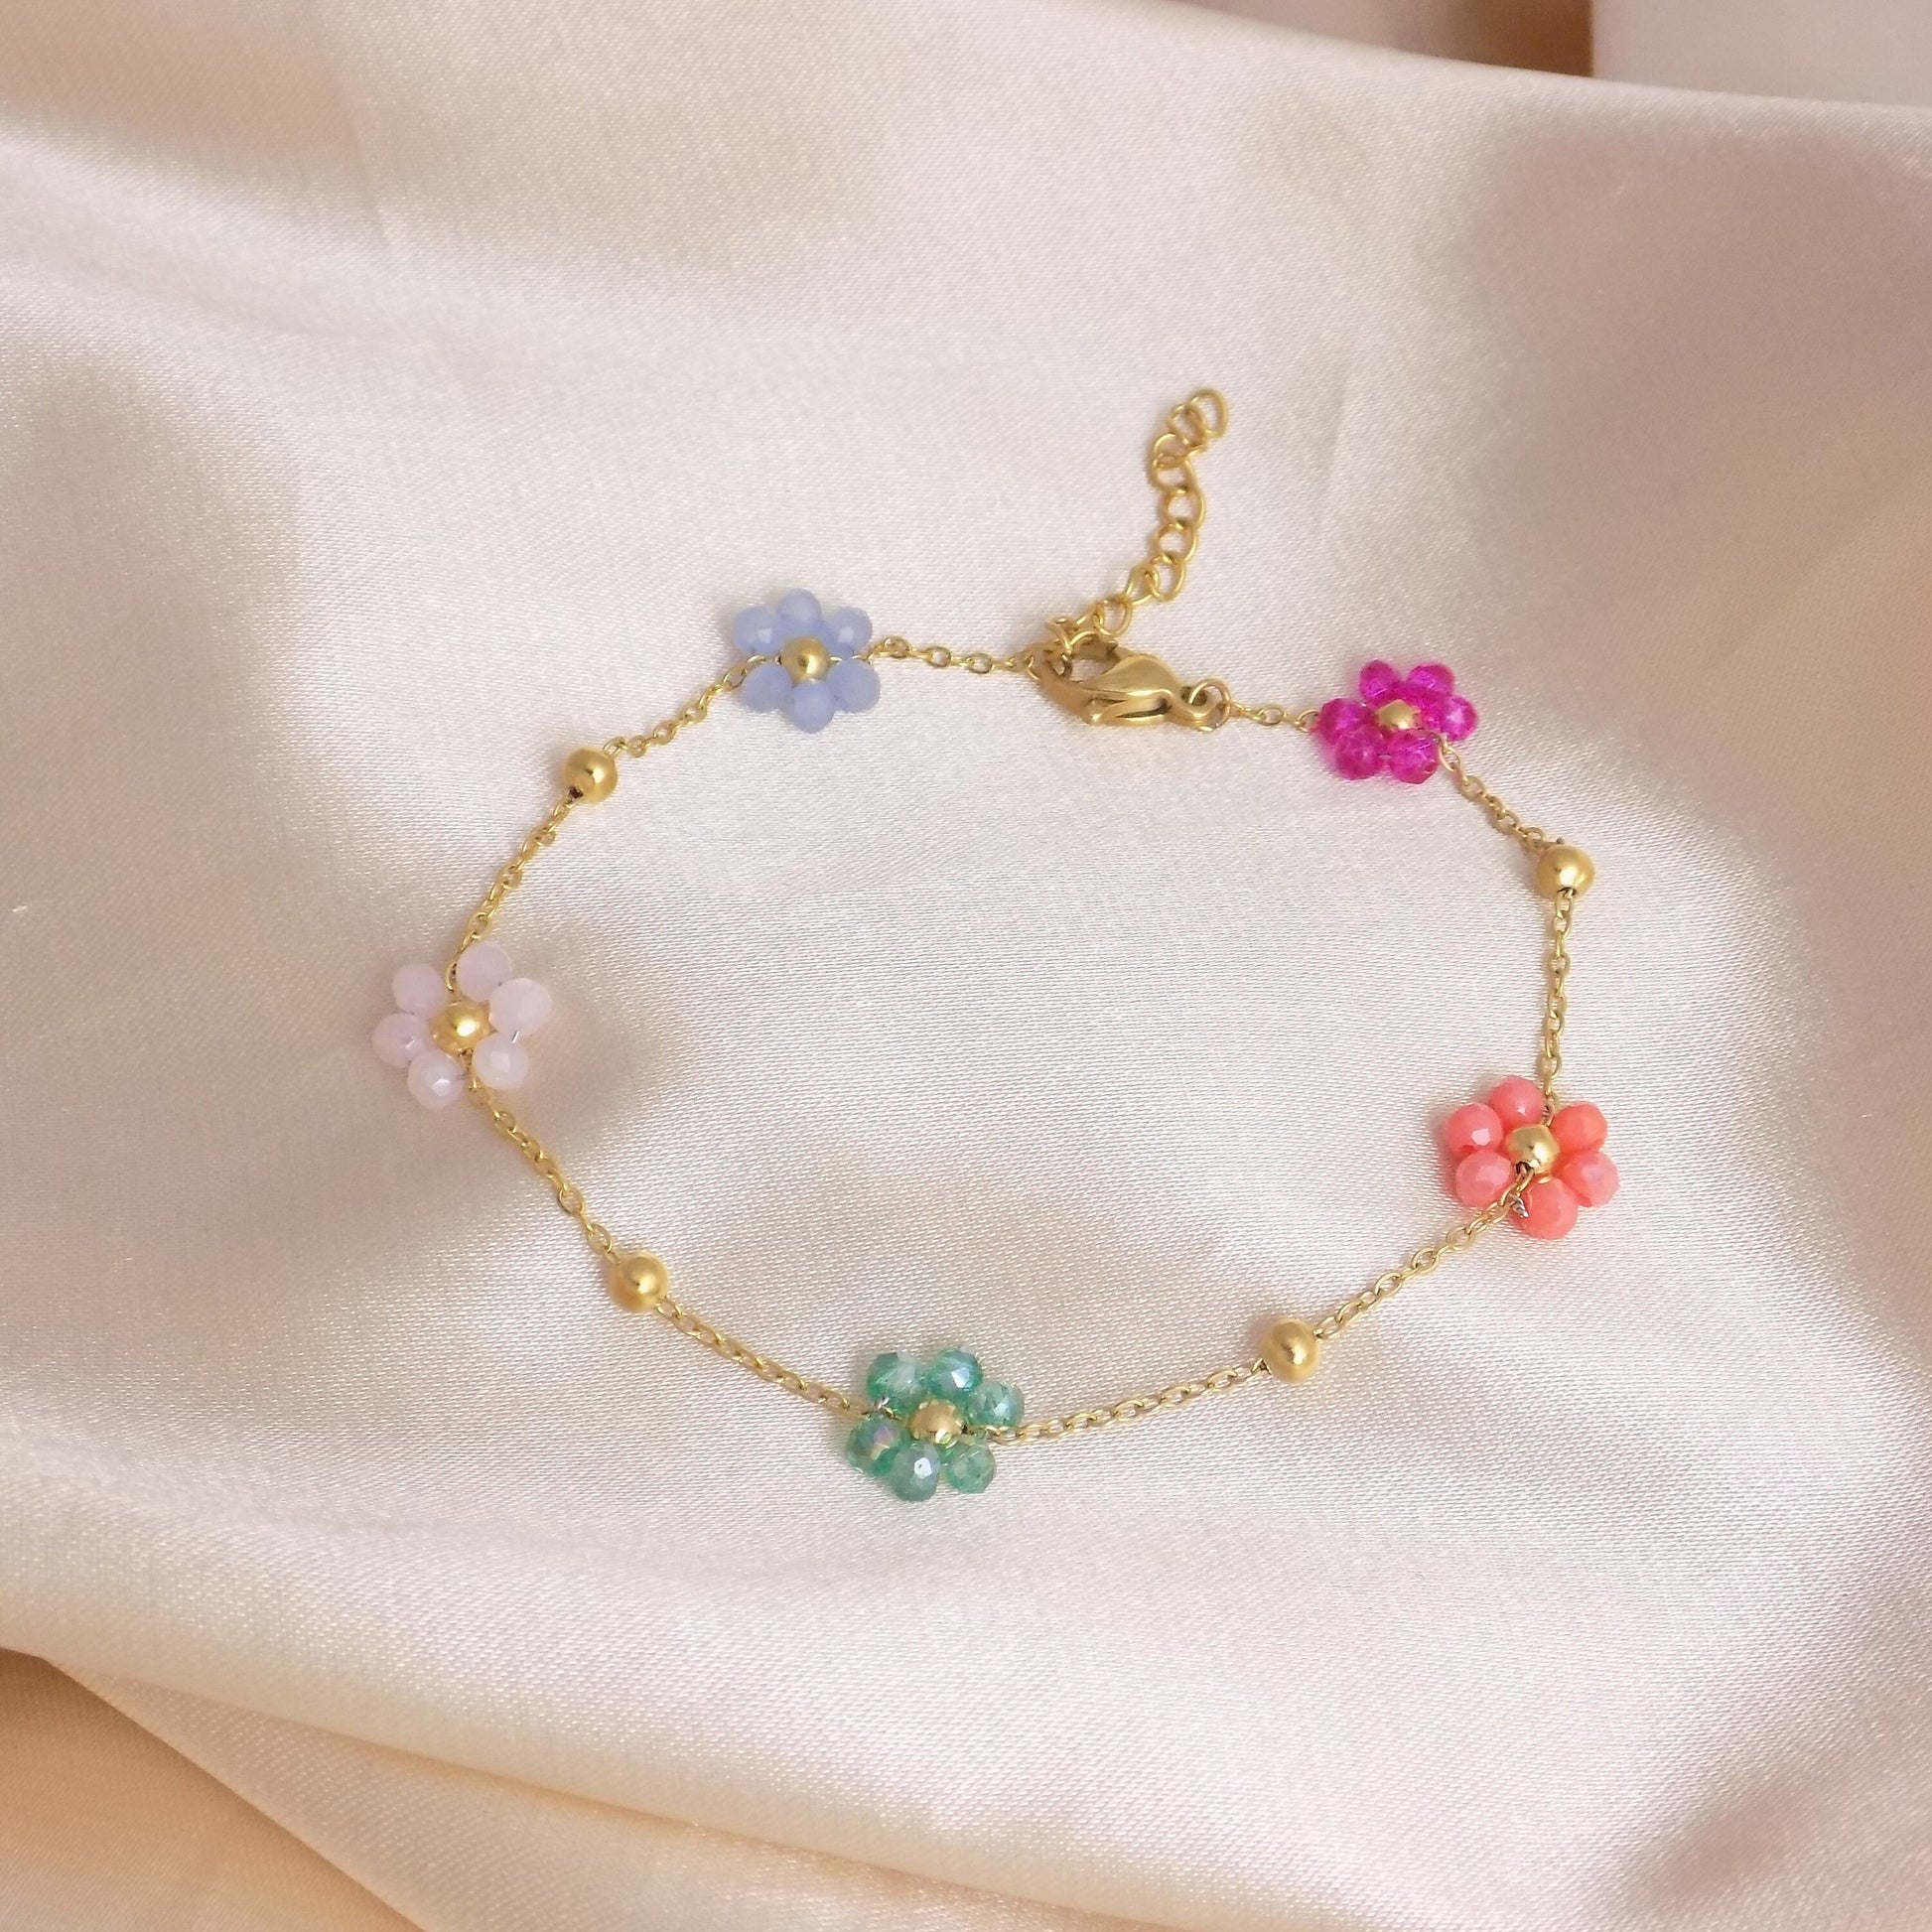 Tiny Colorful Flower Bracelet 18K Gold Stainless Steel - Pink Green Blue Beaded